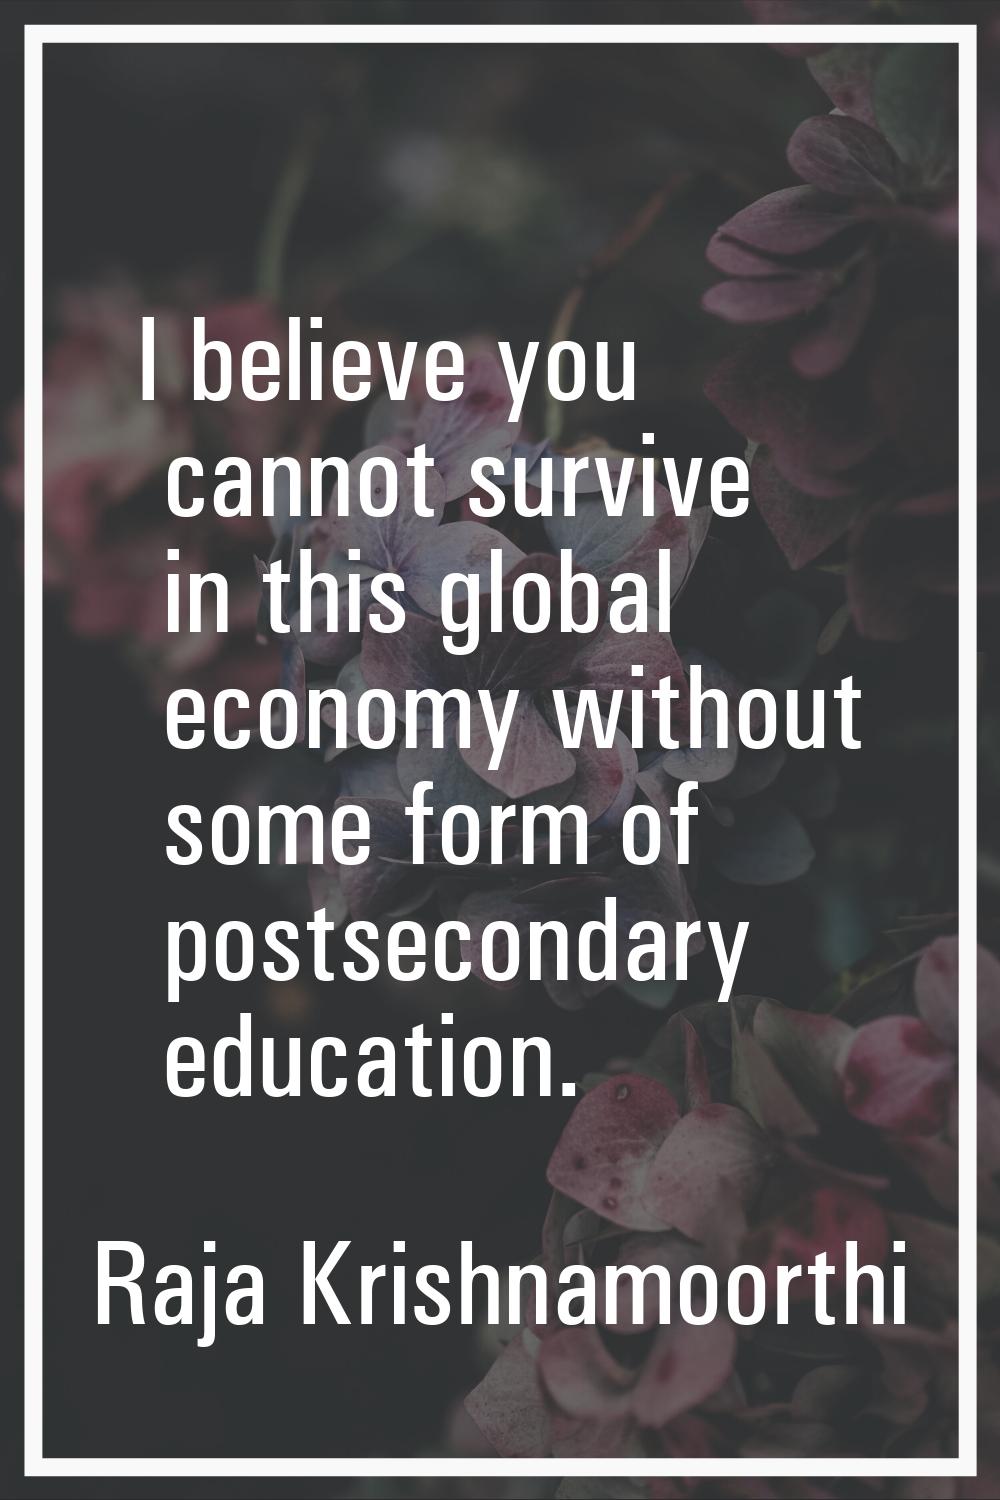 I believe you cannot survive in this global economy without some form of postsecondary education.